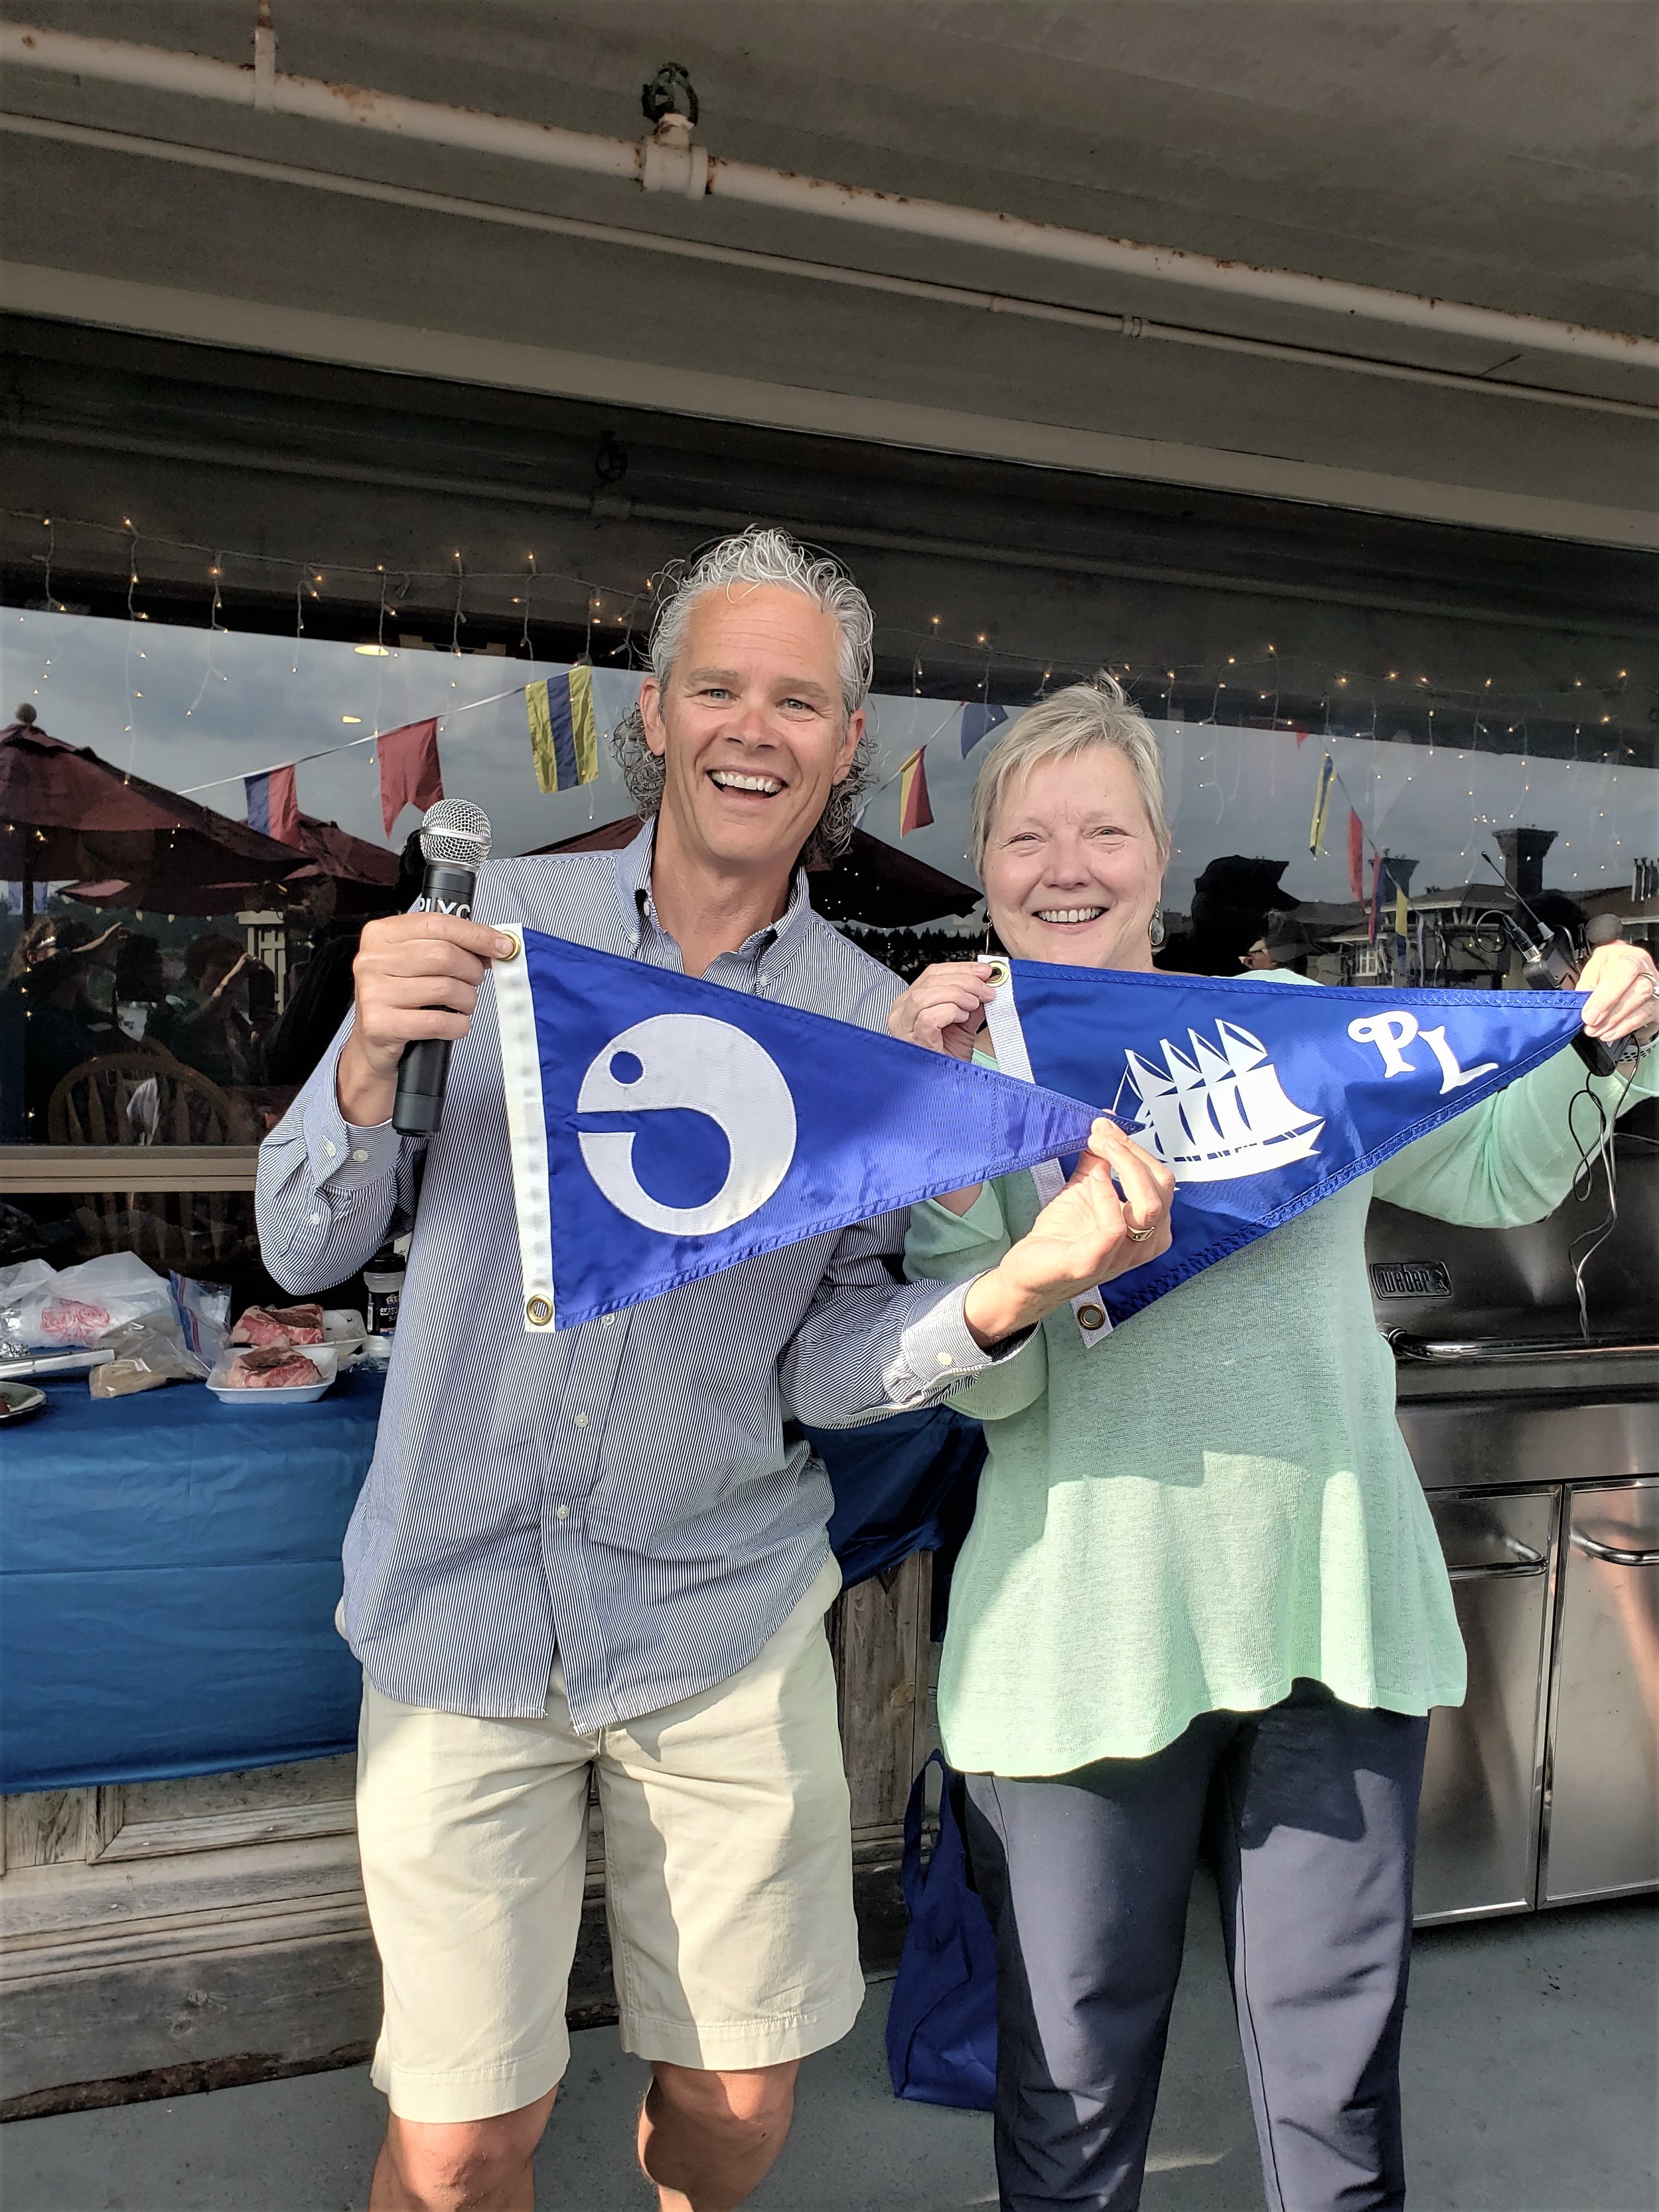 Burgee Exchange with Shelter Bay 2019.jpg